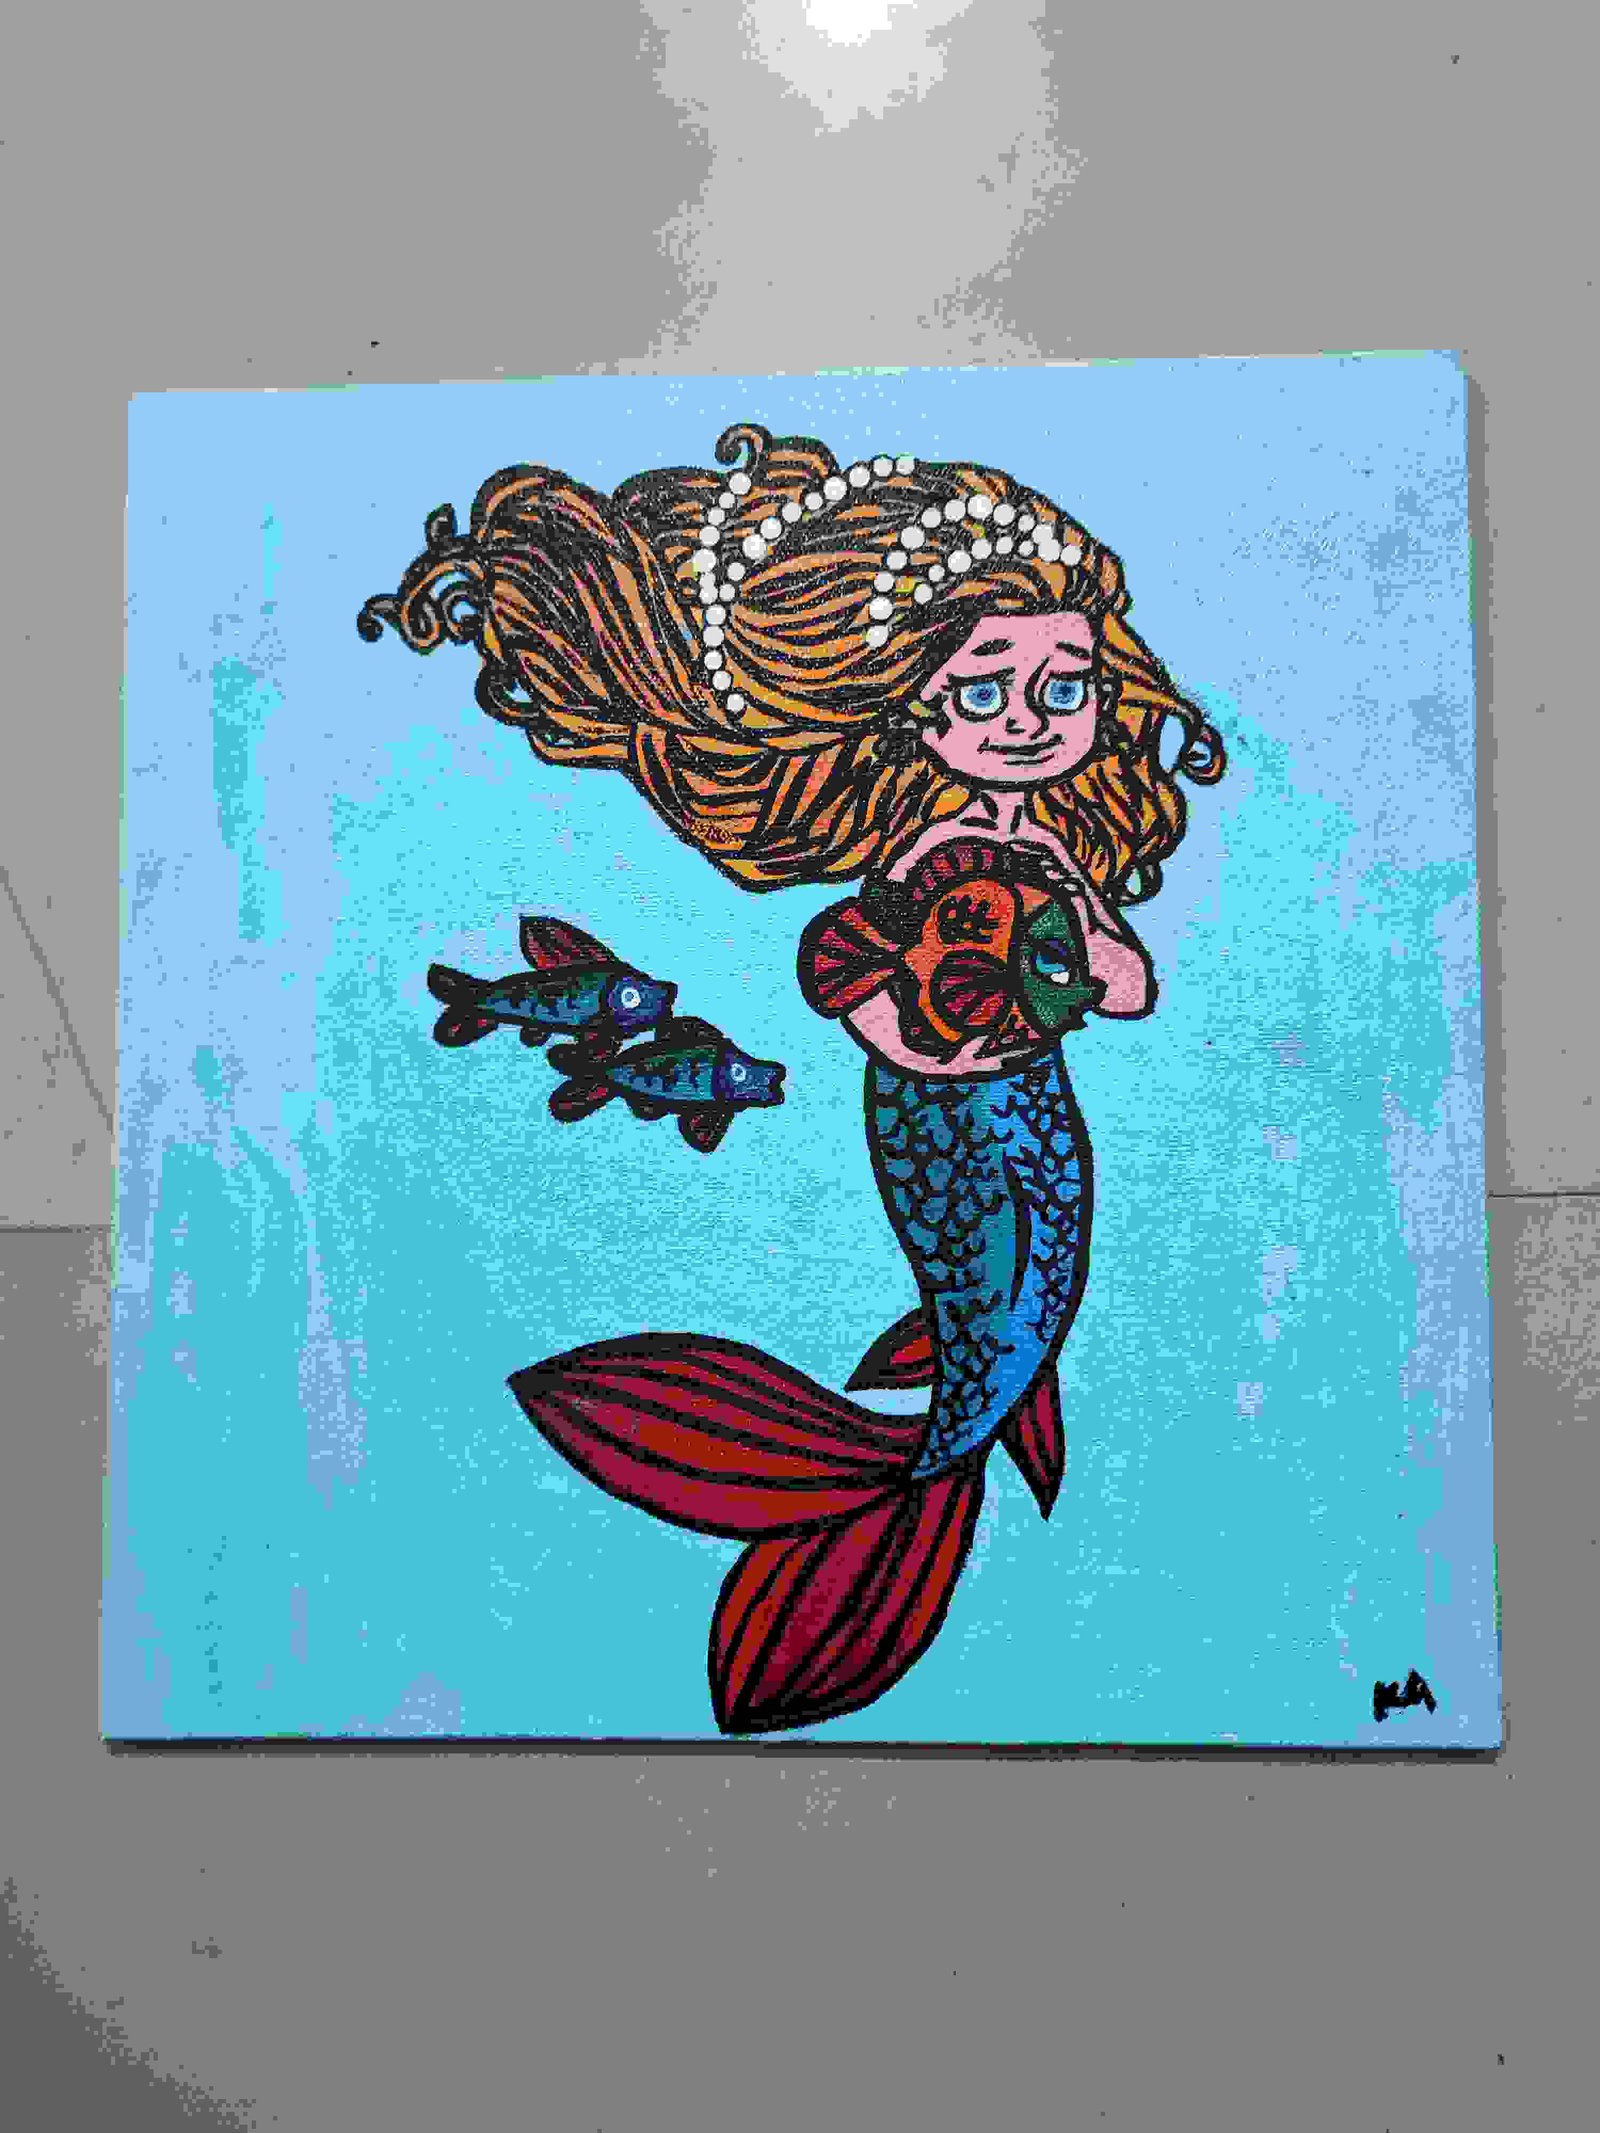 Painting Of Mermaid In Acrylic Painting Size 3030 Sq Cm